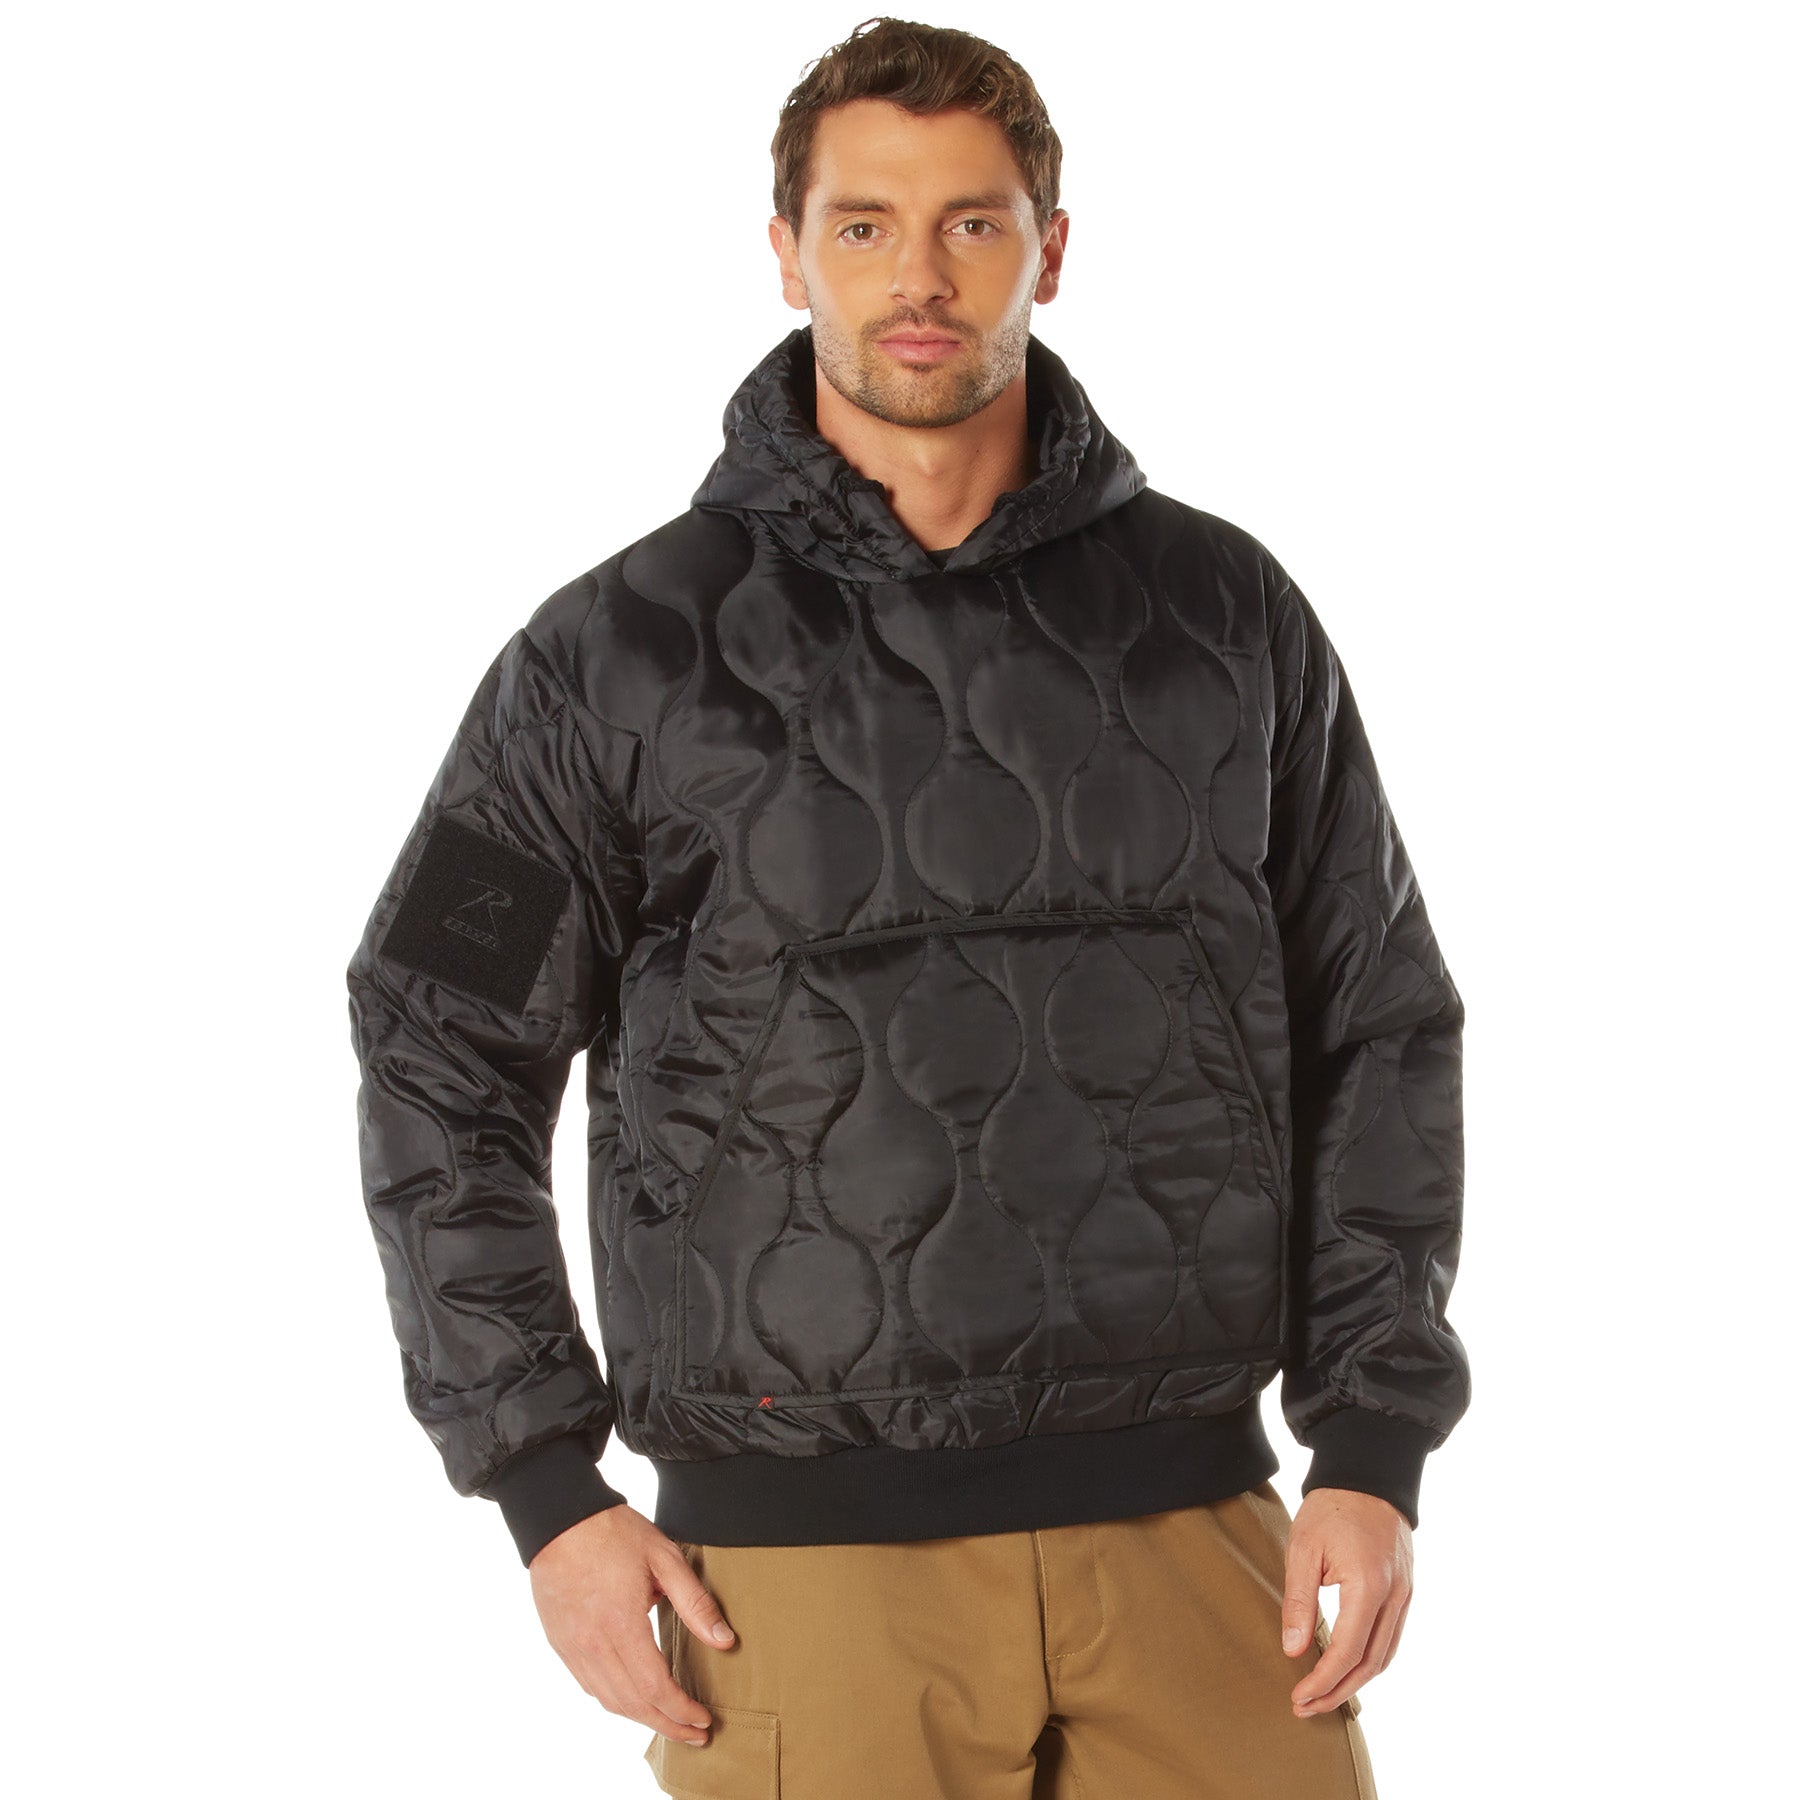 ROTHCo Quilted Woobie Hooded Sweatshirt – Security Pro USA